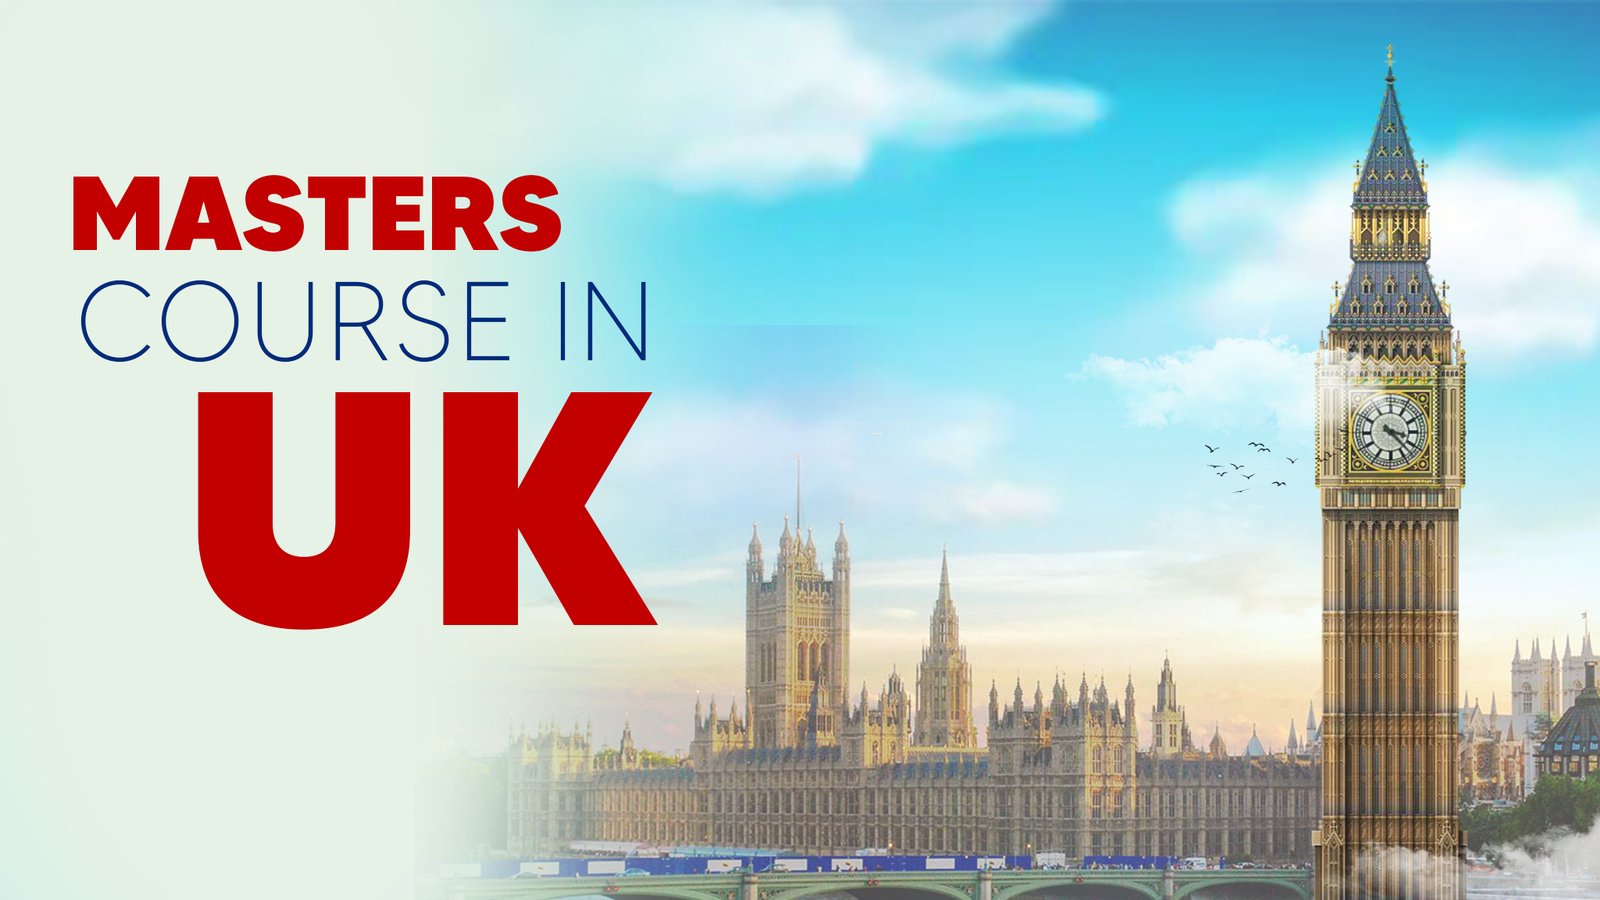 Study Masters course in UK